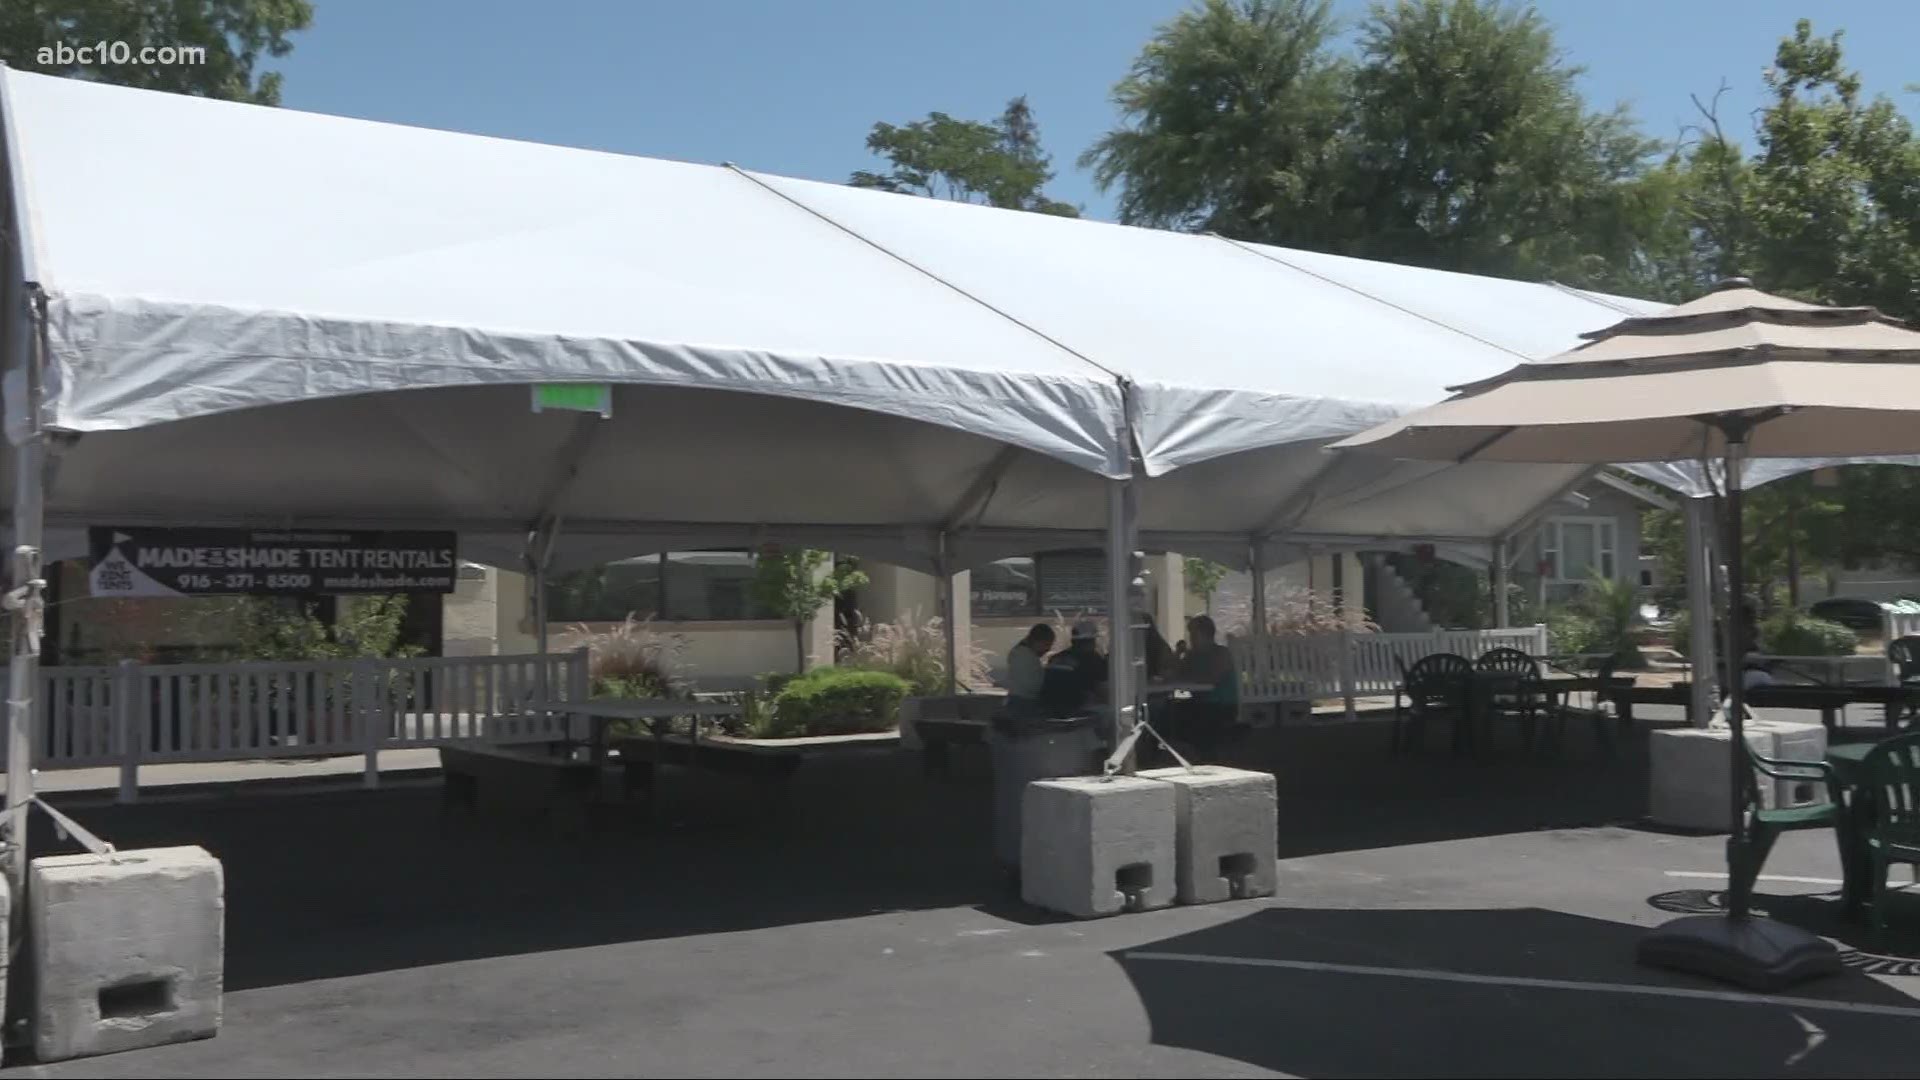 The businesses put up a giant tent in the middle of the street to allow up to 55 guests to dine outside for both food places.